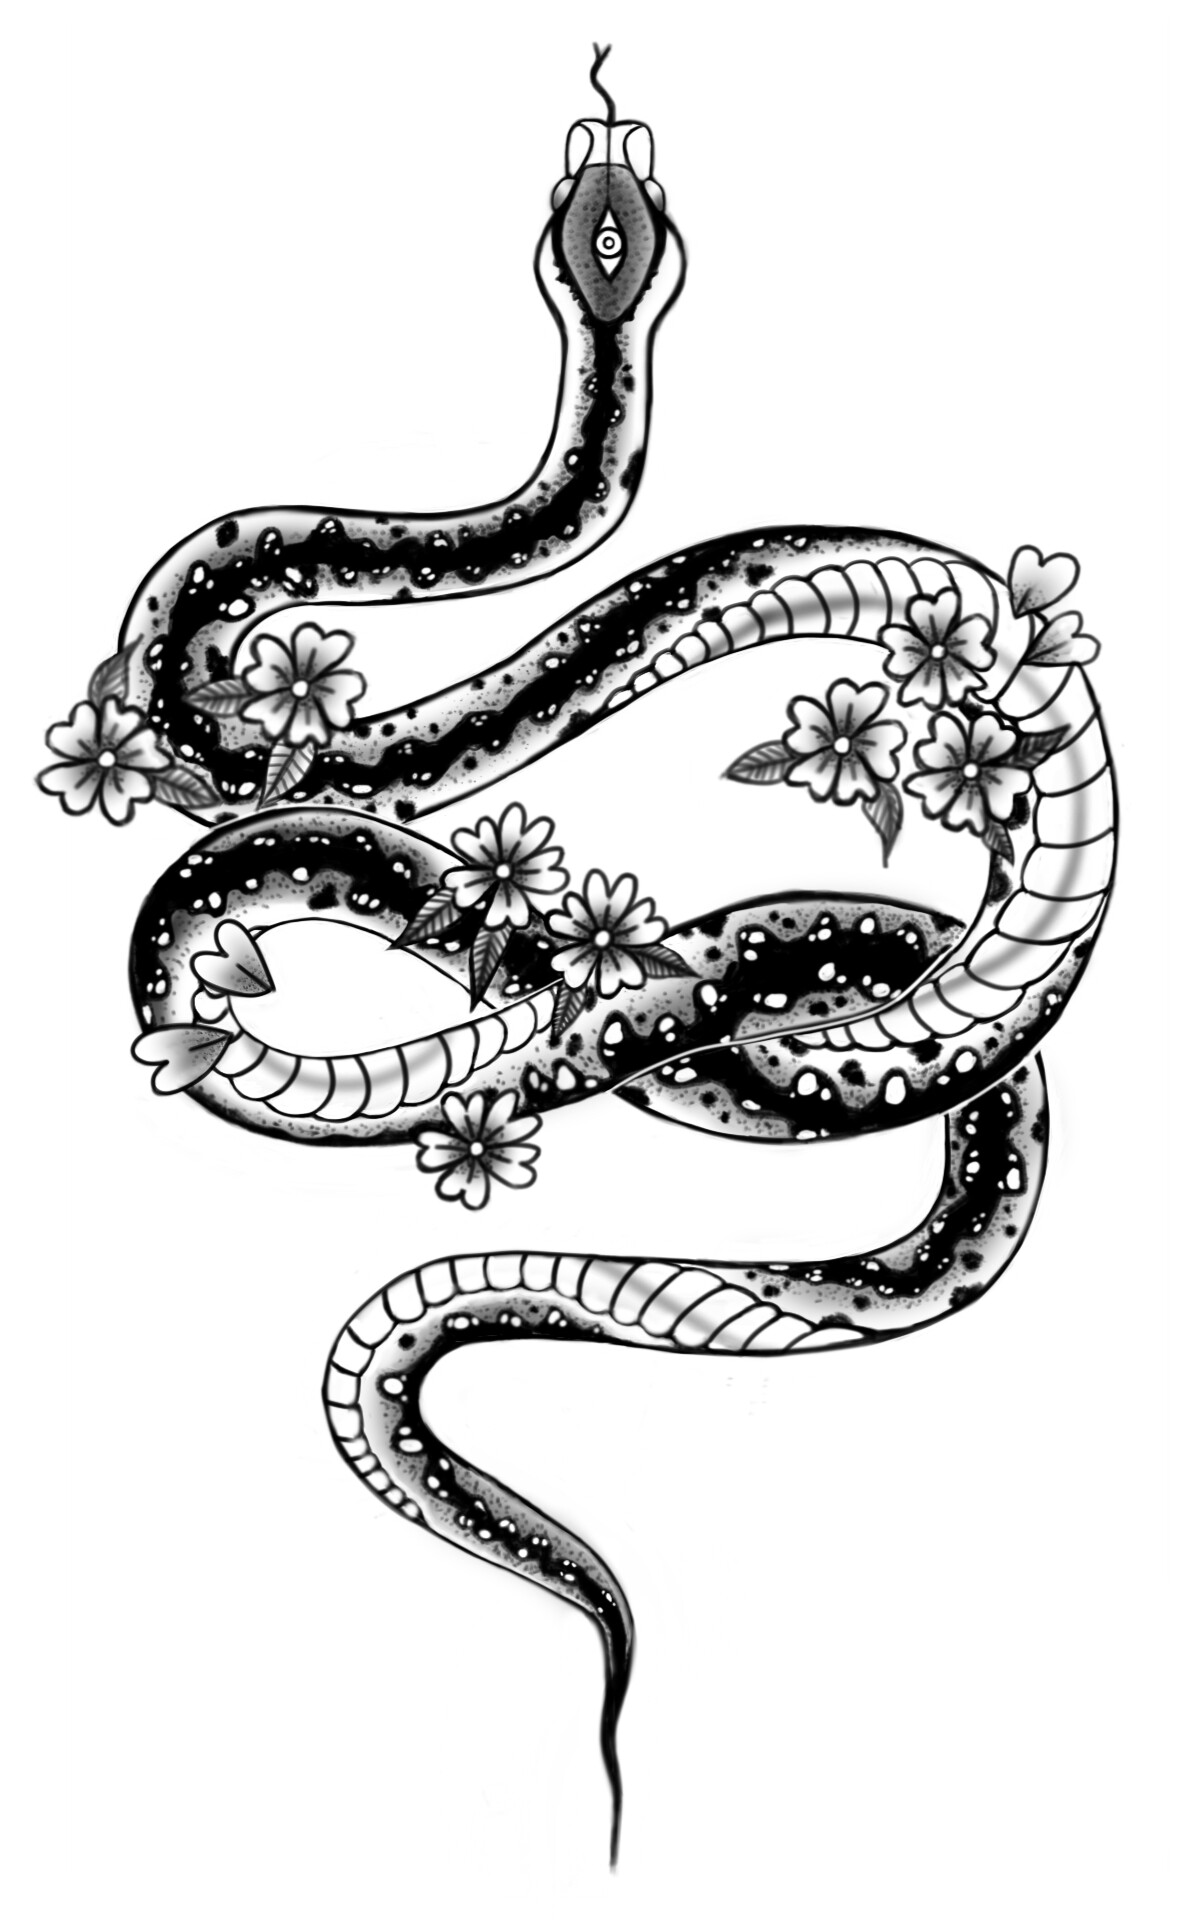 Chinese Snake Tattoo Designs  Chinese Temple